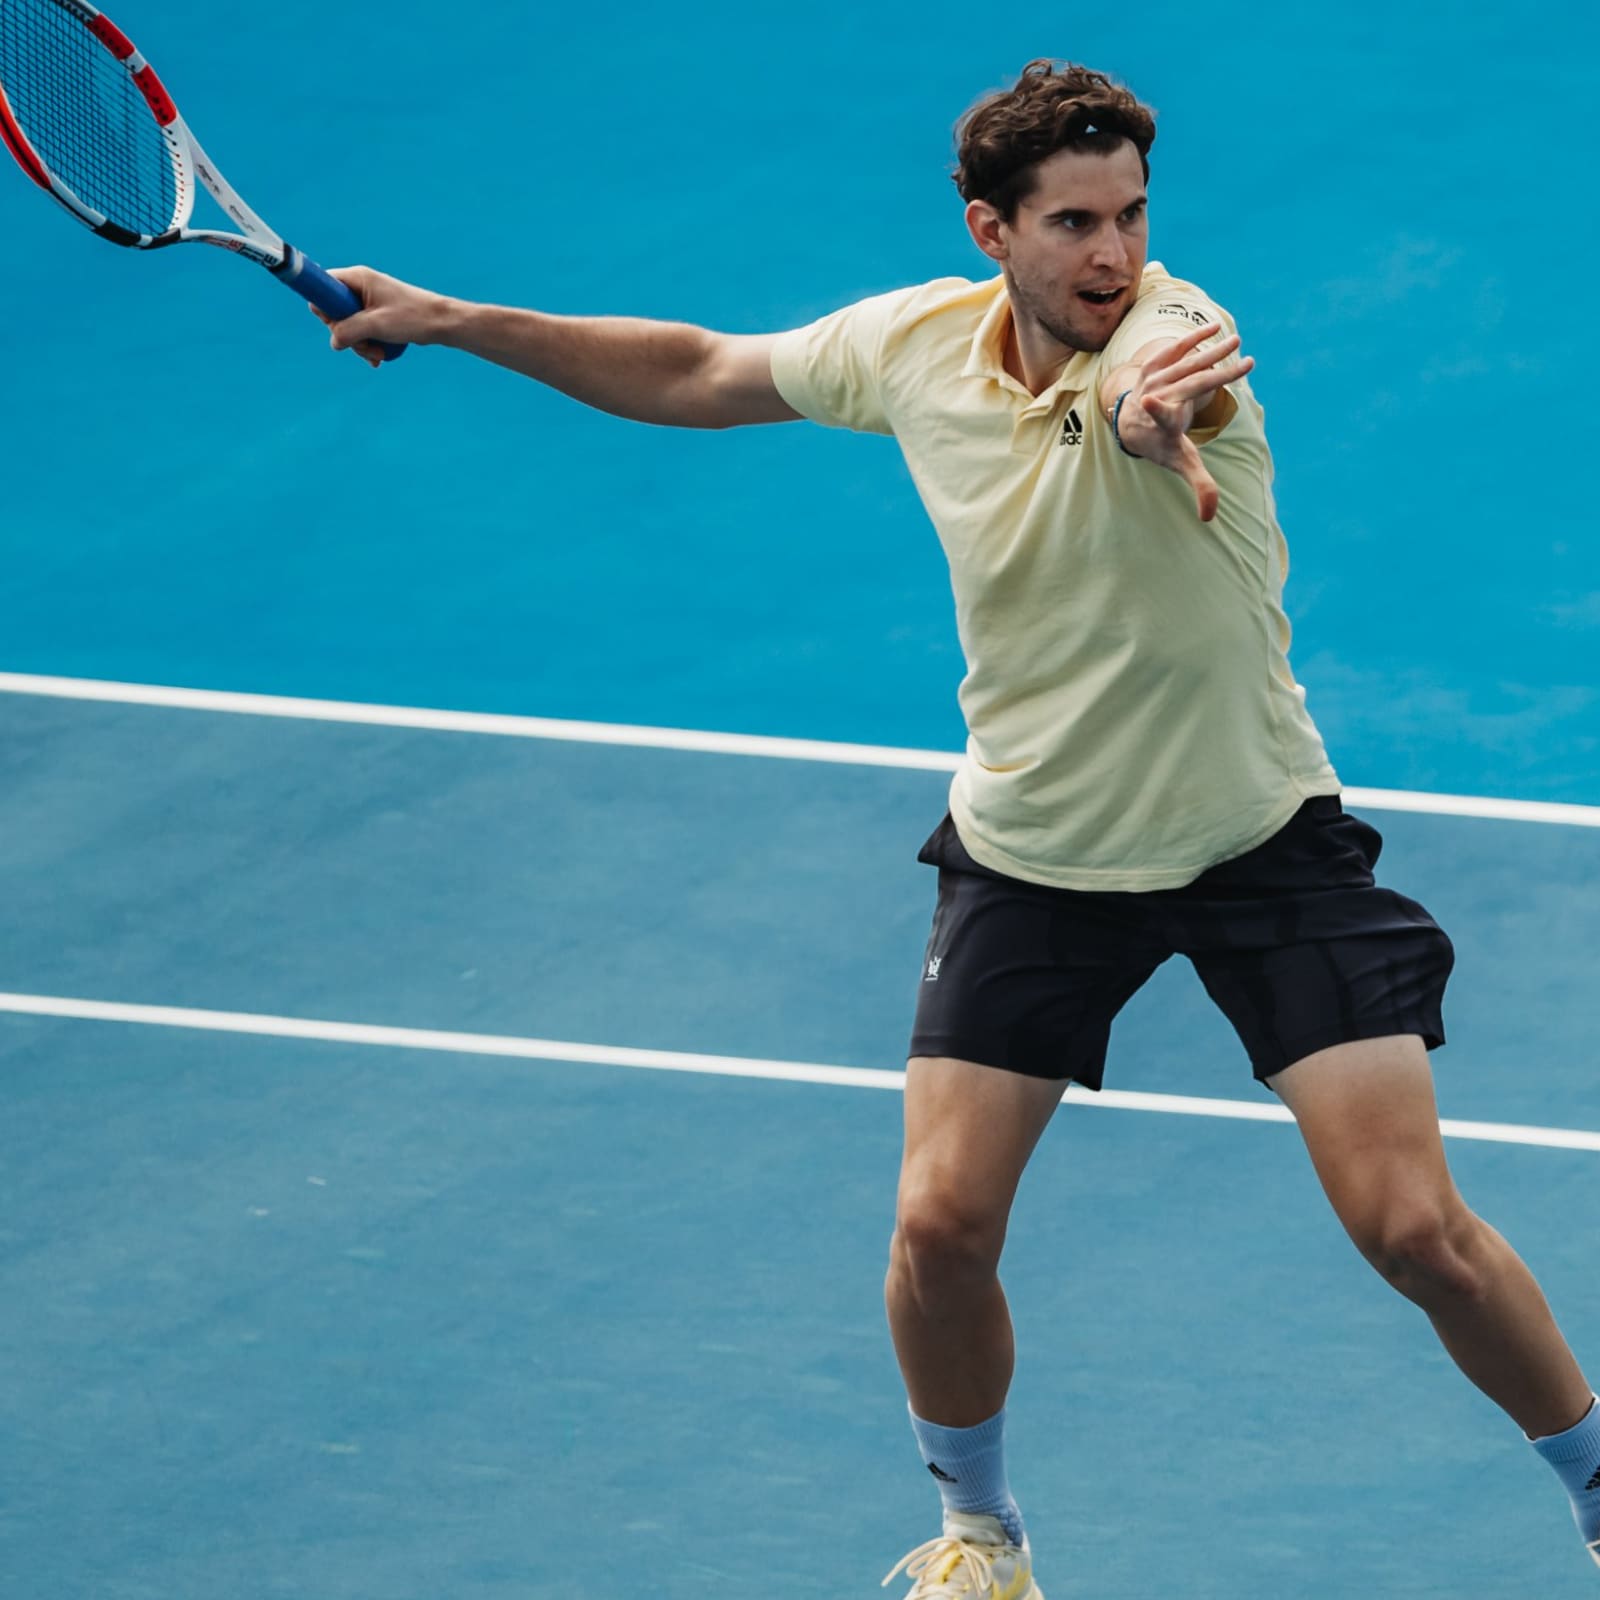 Australian Open 2023 Dominic Thiem Crashes Out in First Round After Loss to Andrey Rublev